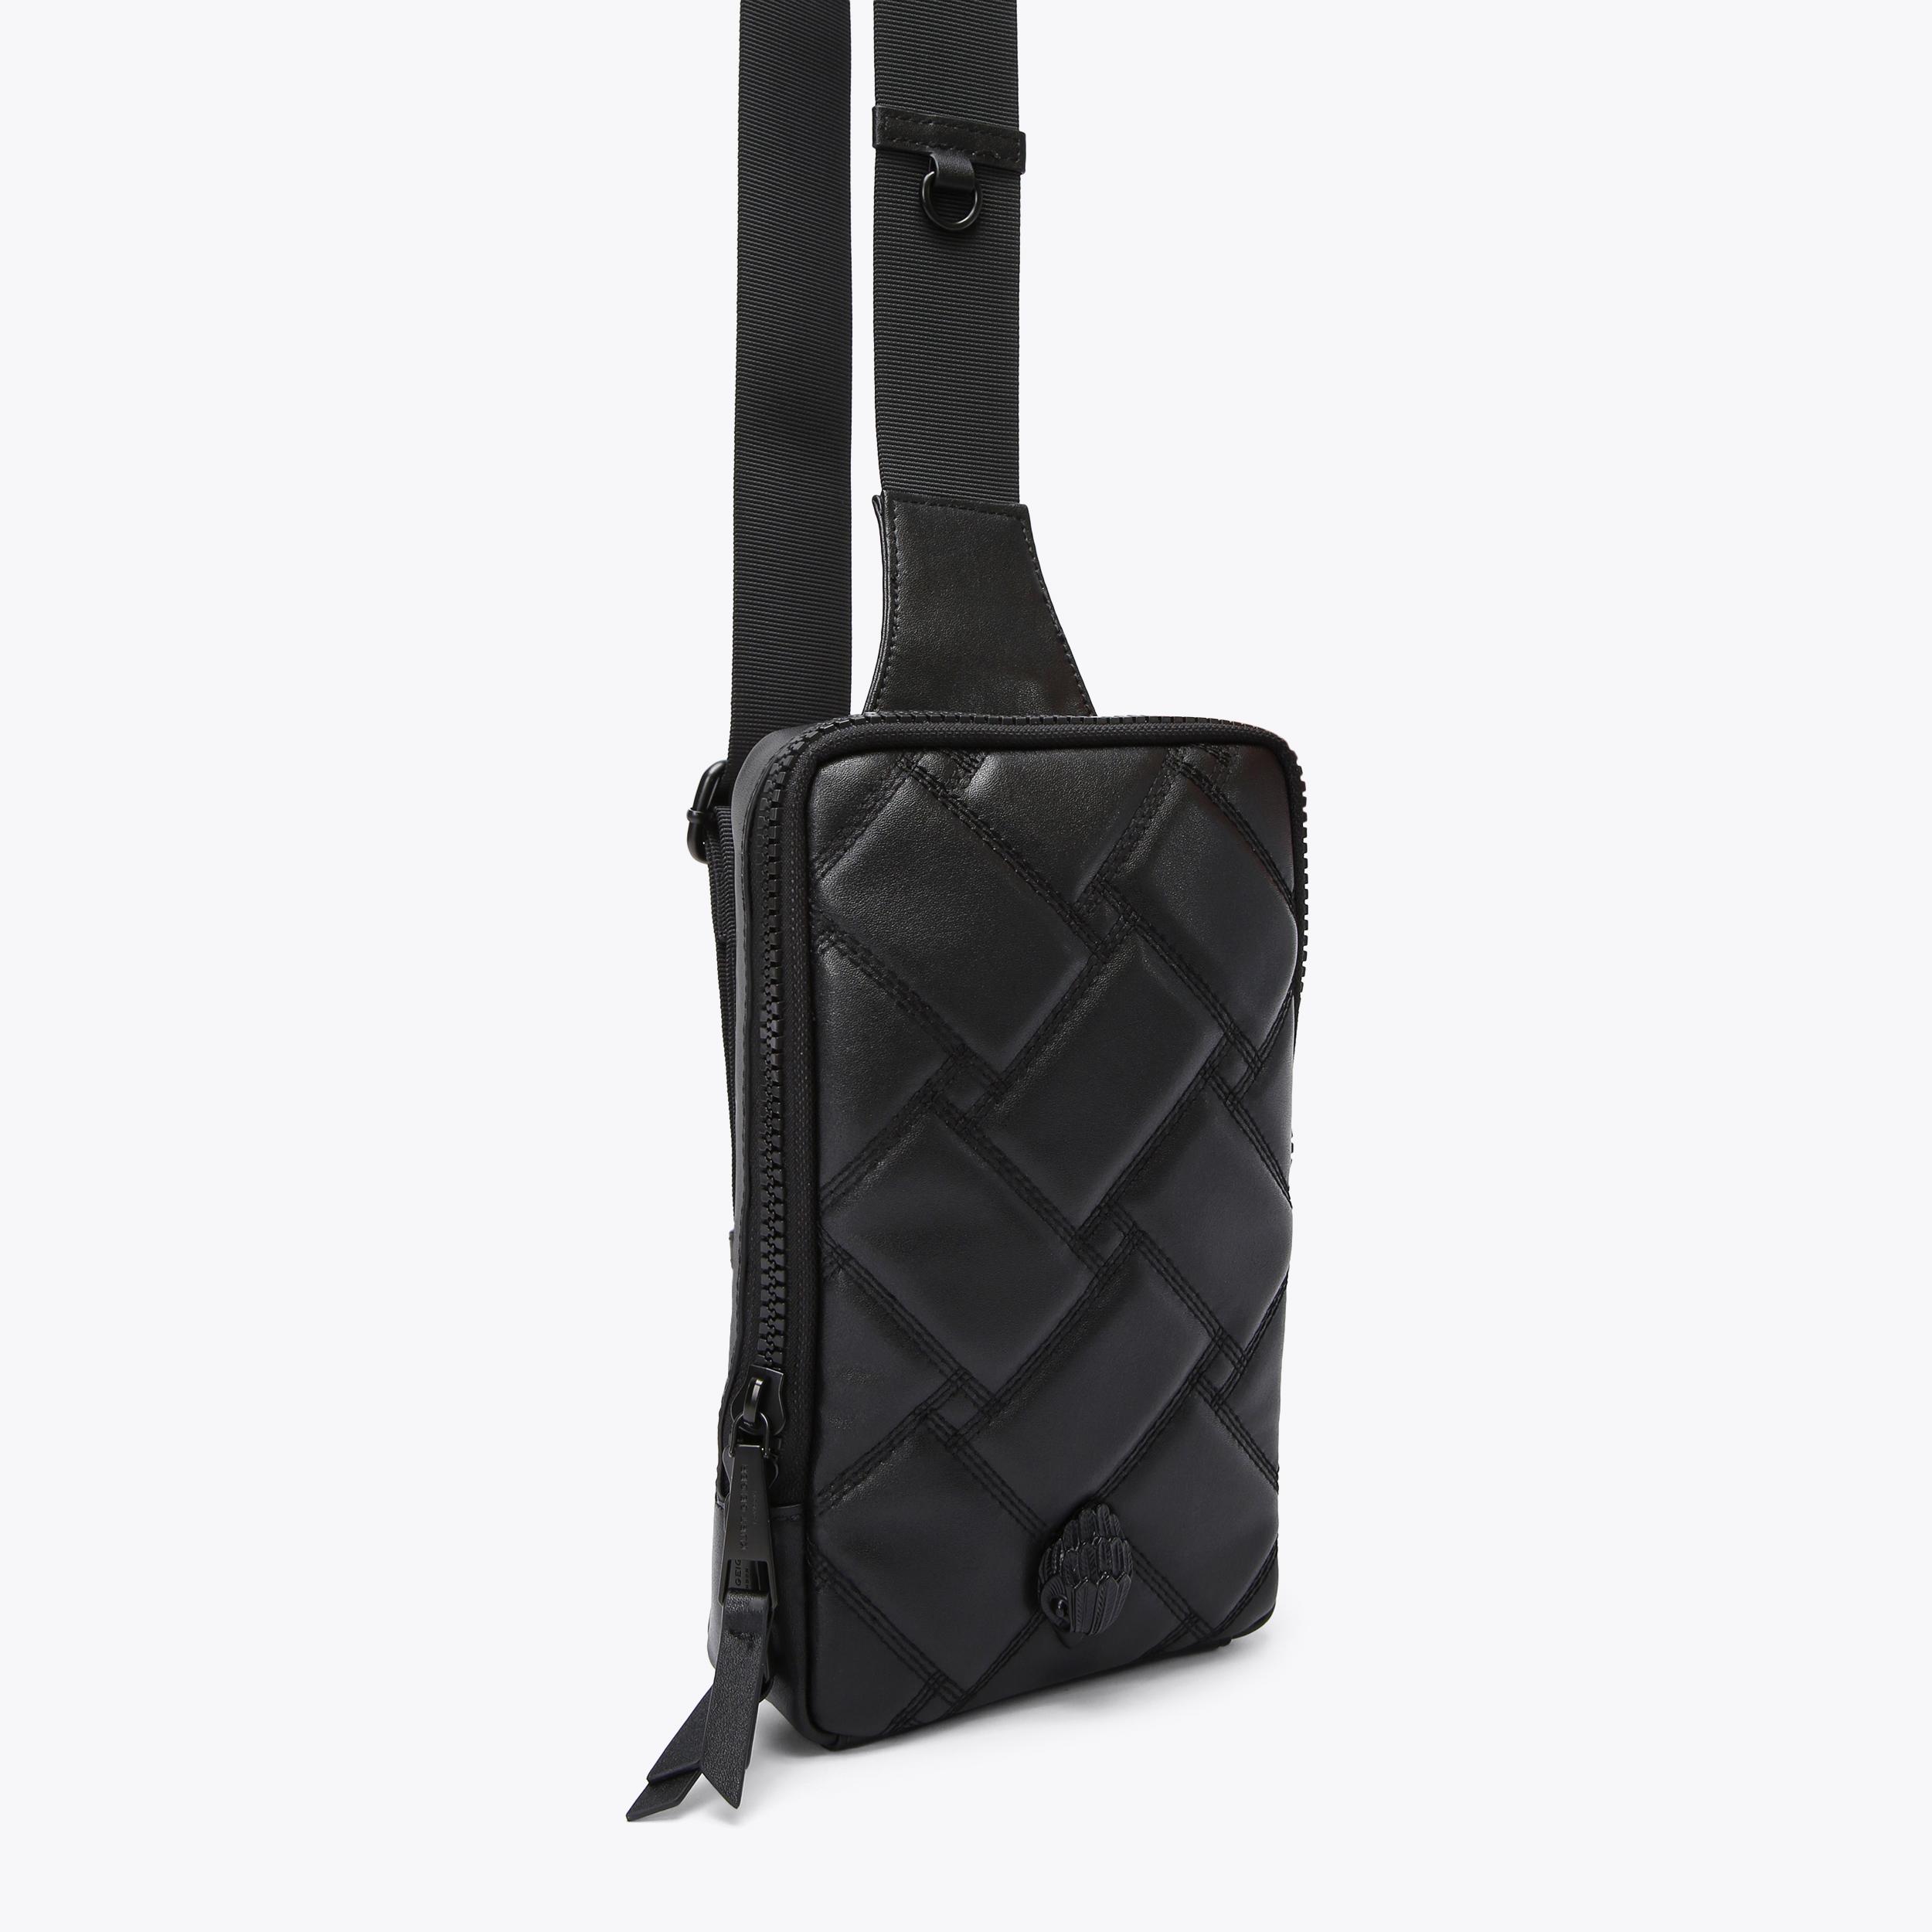 KENSINGTON M BODY Black Quilted Leather Cross Body Bag by KURT GEIGER ...